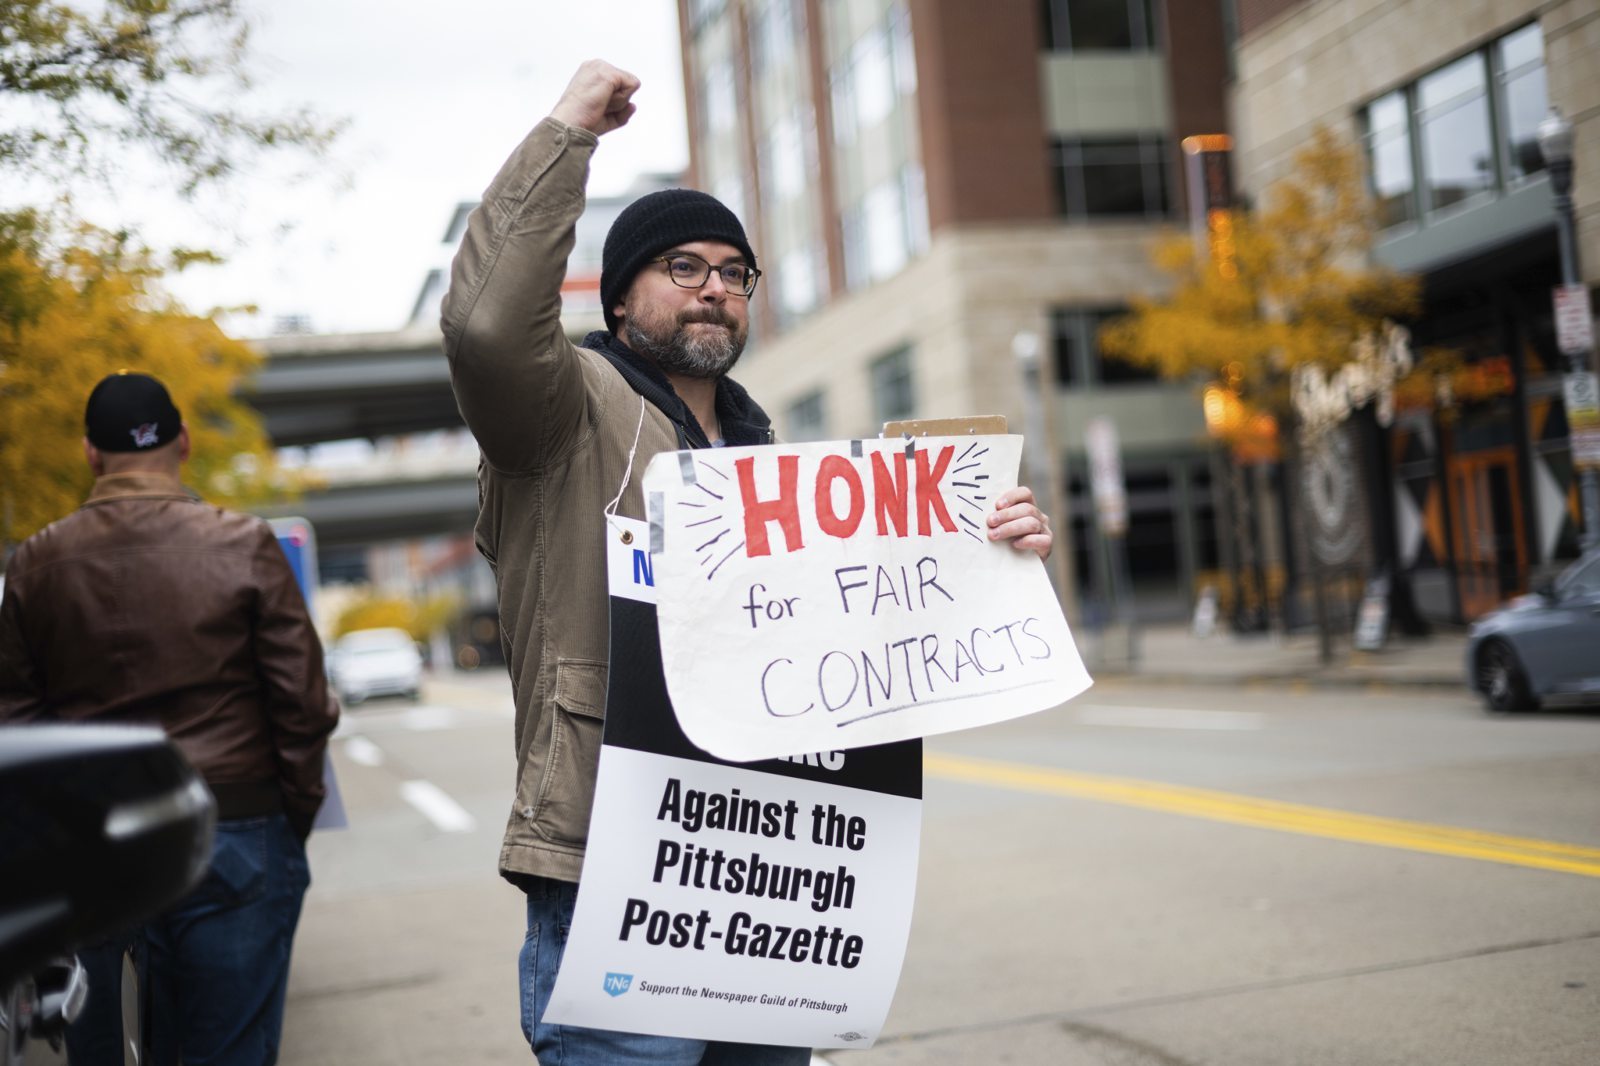 Weekend edition of Post-Gazette spotted amid worker strike - CBS Pittsburgh